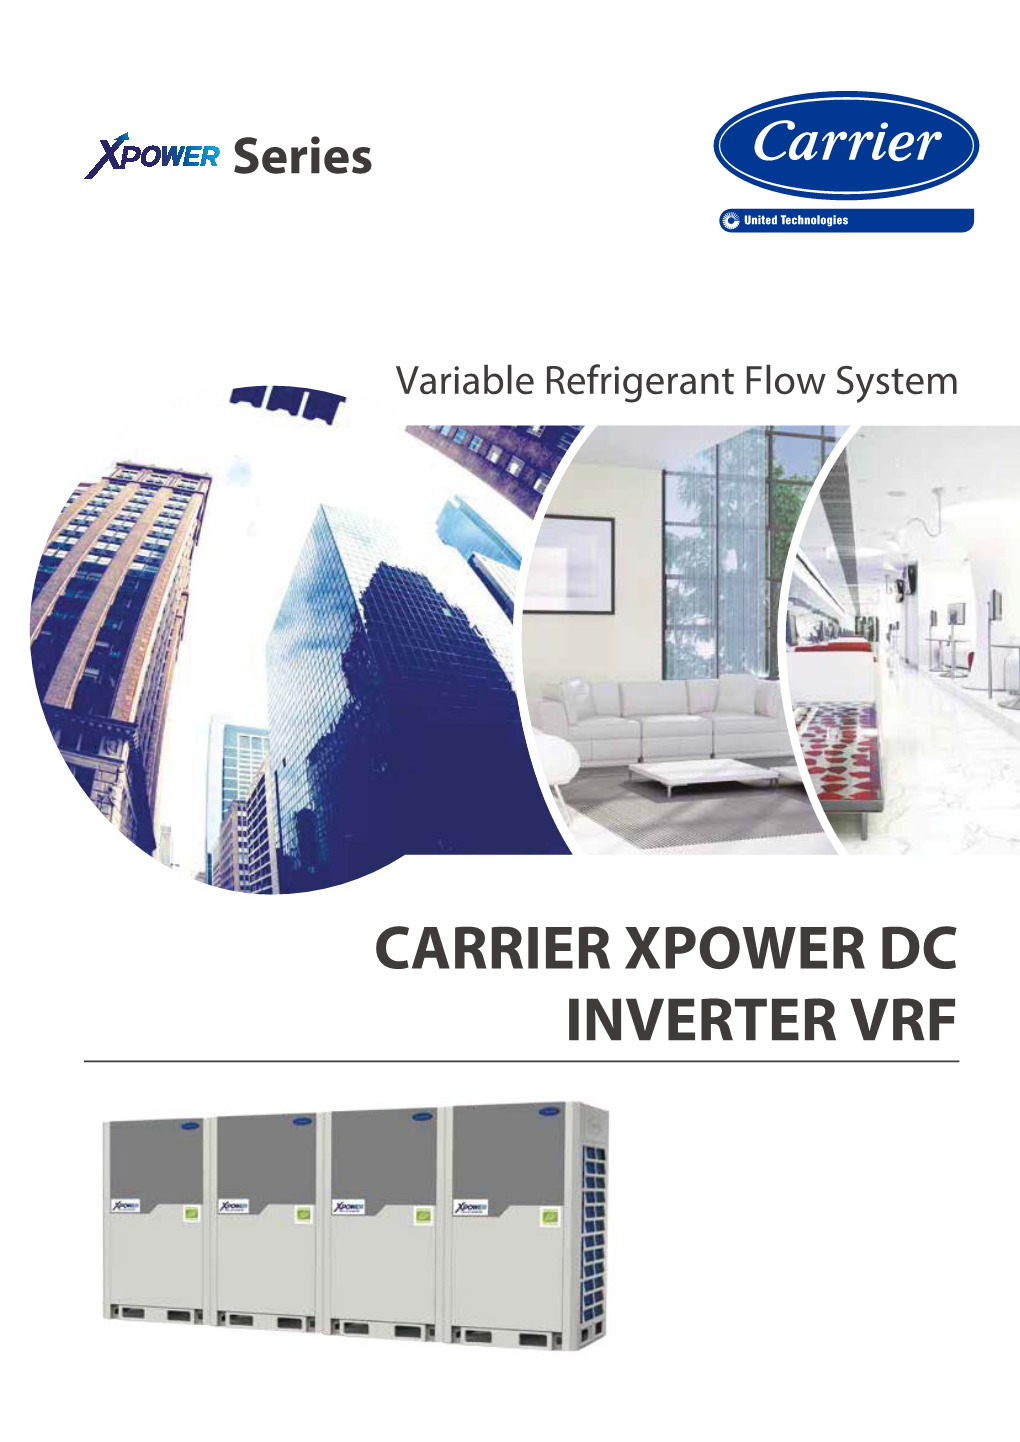 CARRIER XPOWER DC INVERTER VRF INDEX Outdoor Units